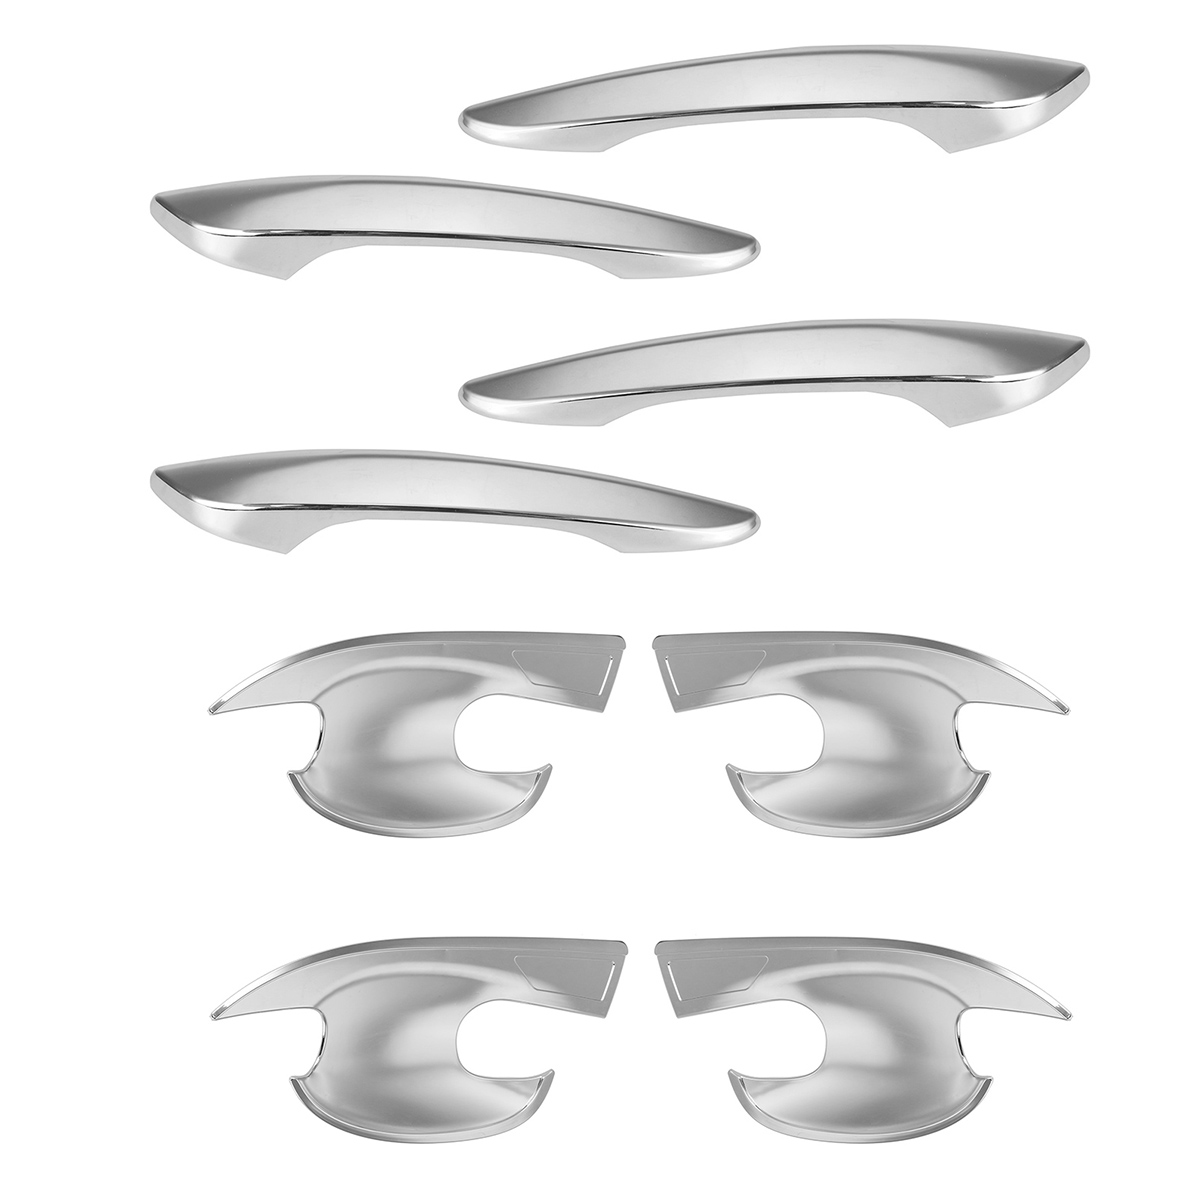 Chrome-Handle-Protective-Cover-Door-Handle-Outer-Bowls-Trim-For-Mazda-CX-30-2020-1751667-3